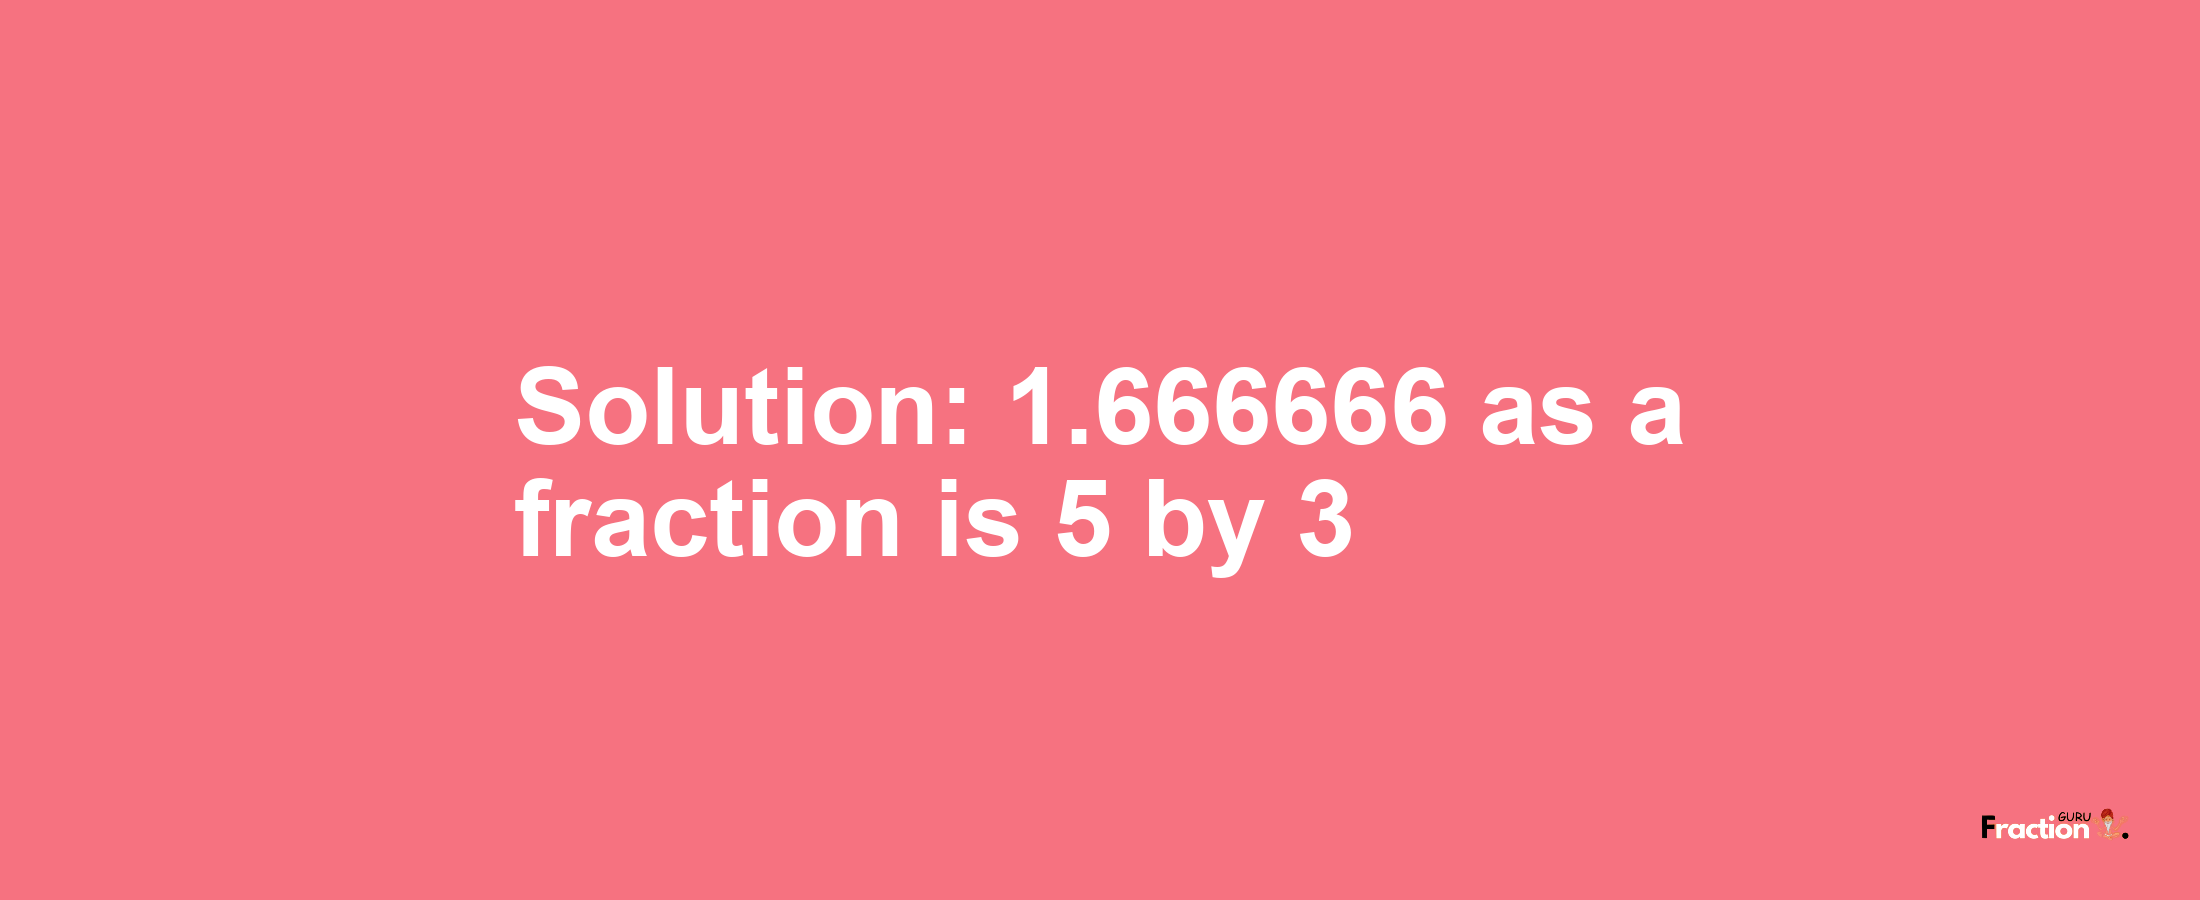 Solution:1.666666 as a fraction is 5/3